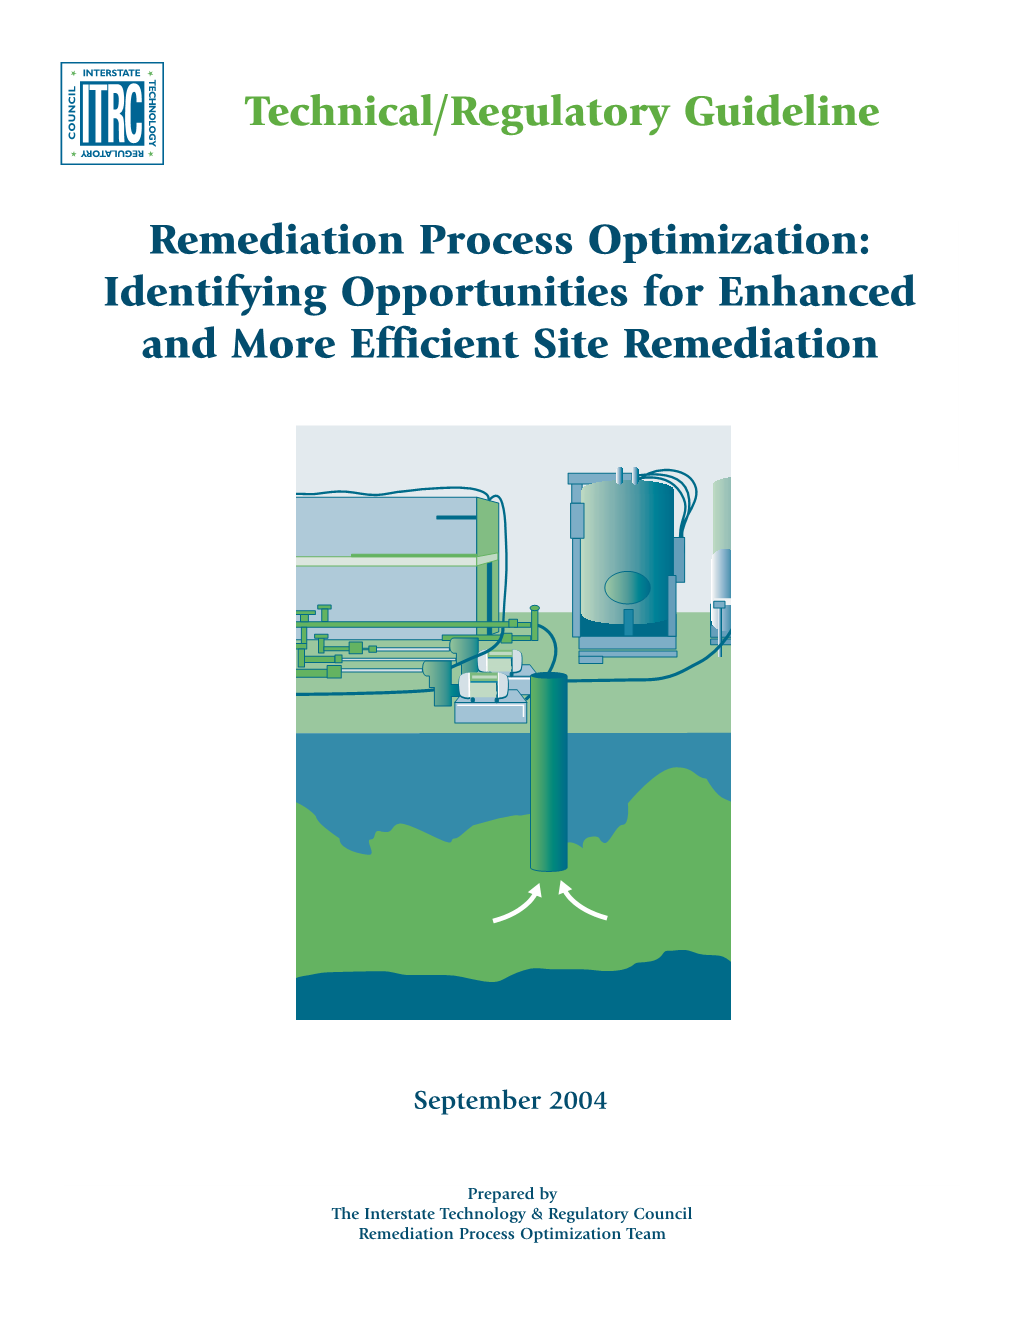 Remediation Process Optimization: Identifying Opportunities for Enhanced and More Efficient Site Remediation